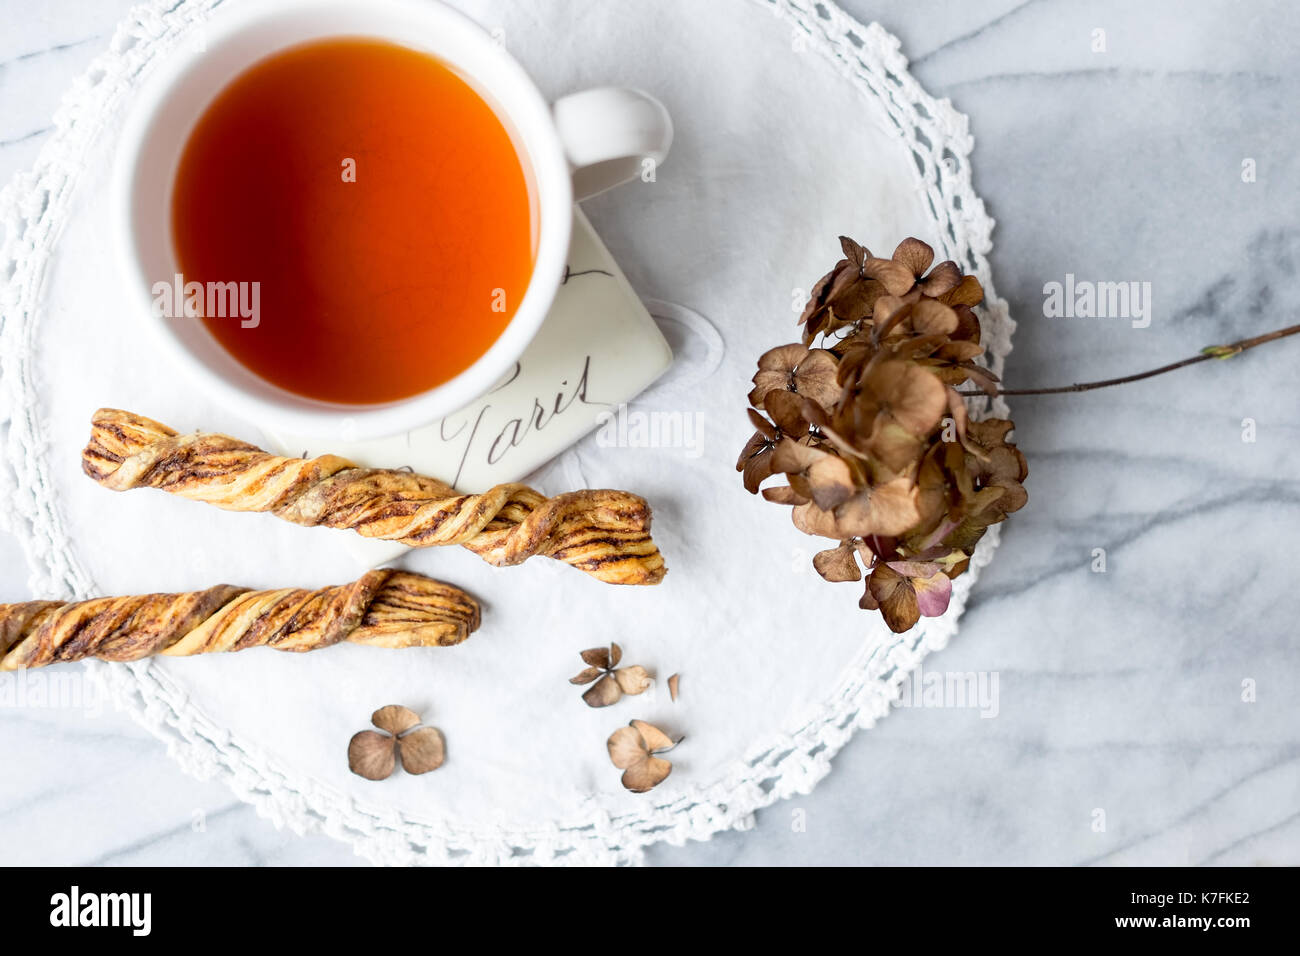 Cup of tea and cinnamon twist cookies on marble table. Paris coaster. Top view. Stock Photo